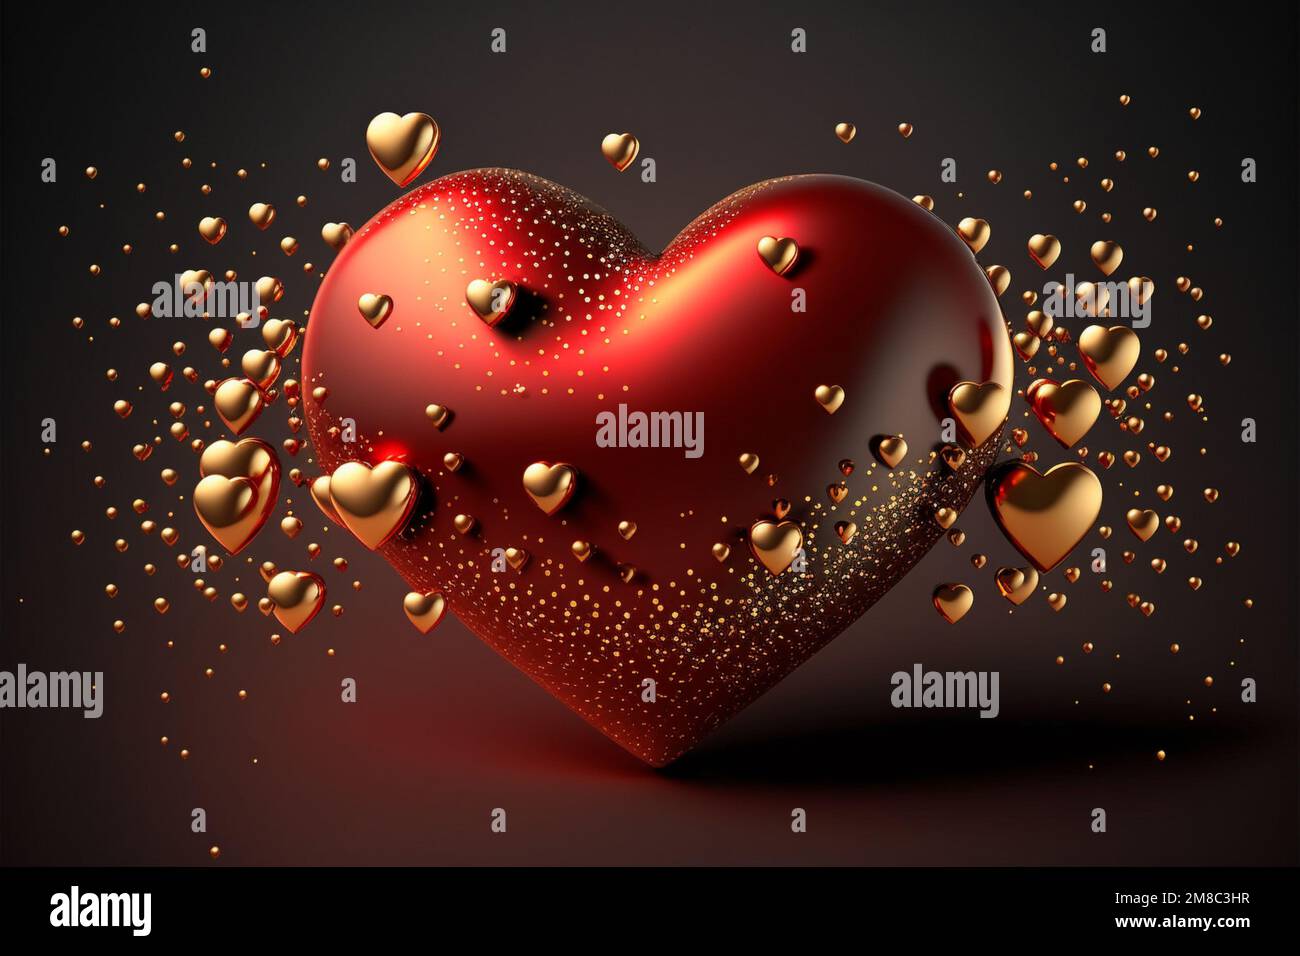 Red and gold Hearts. Valentines Day Background Stock Photo